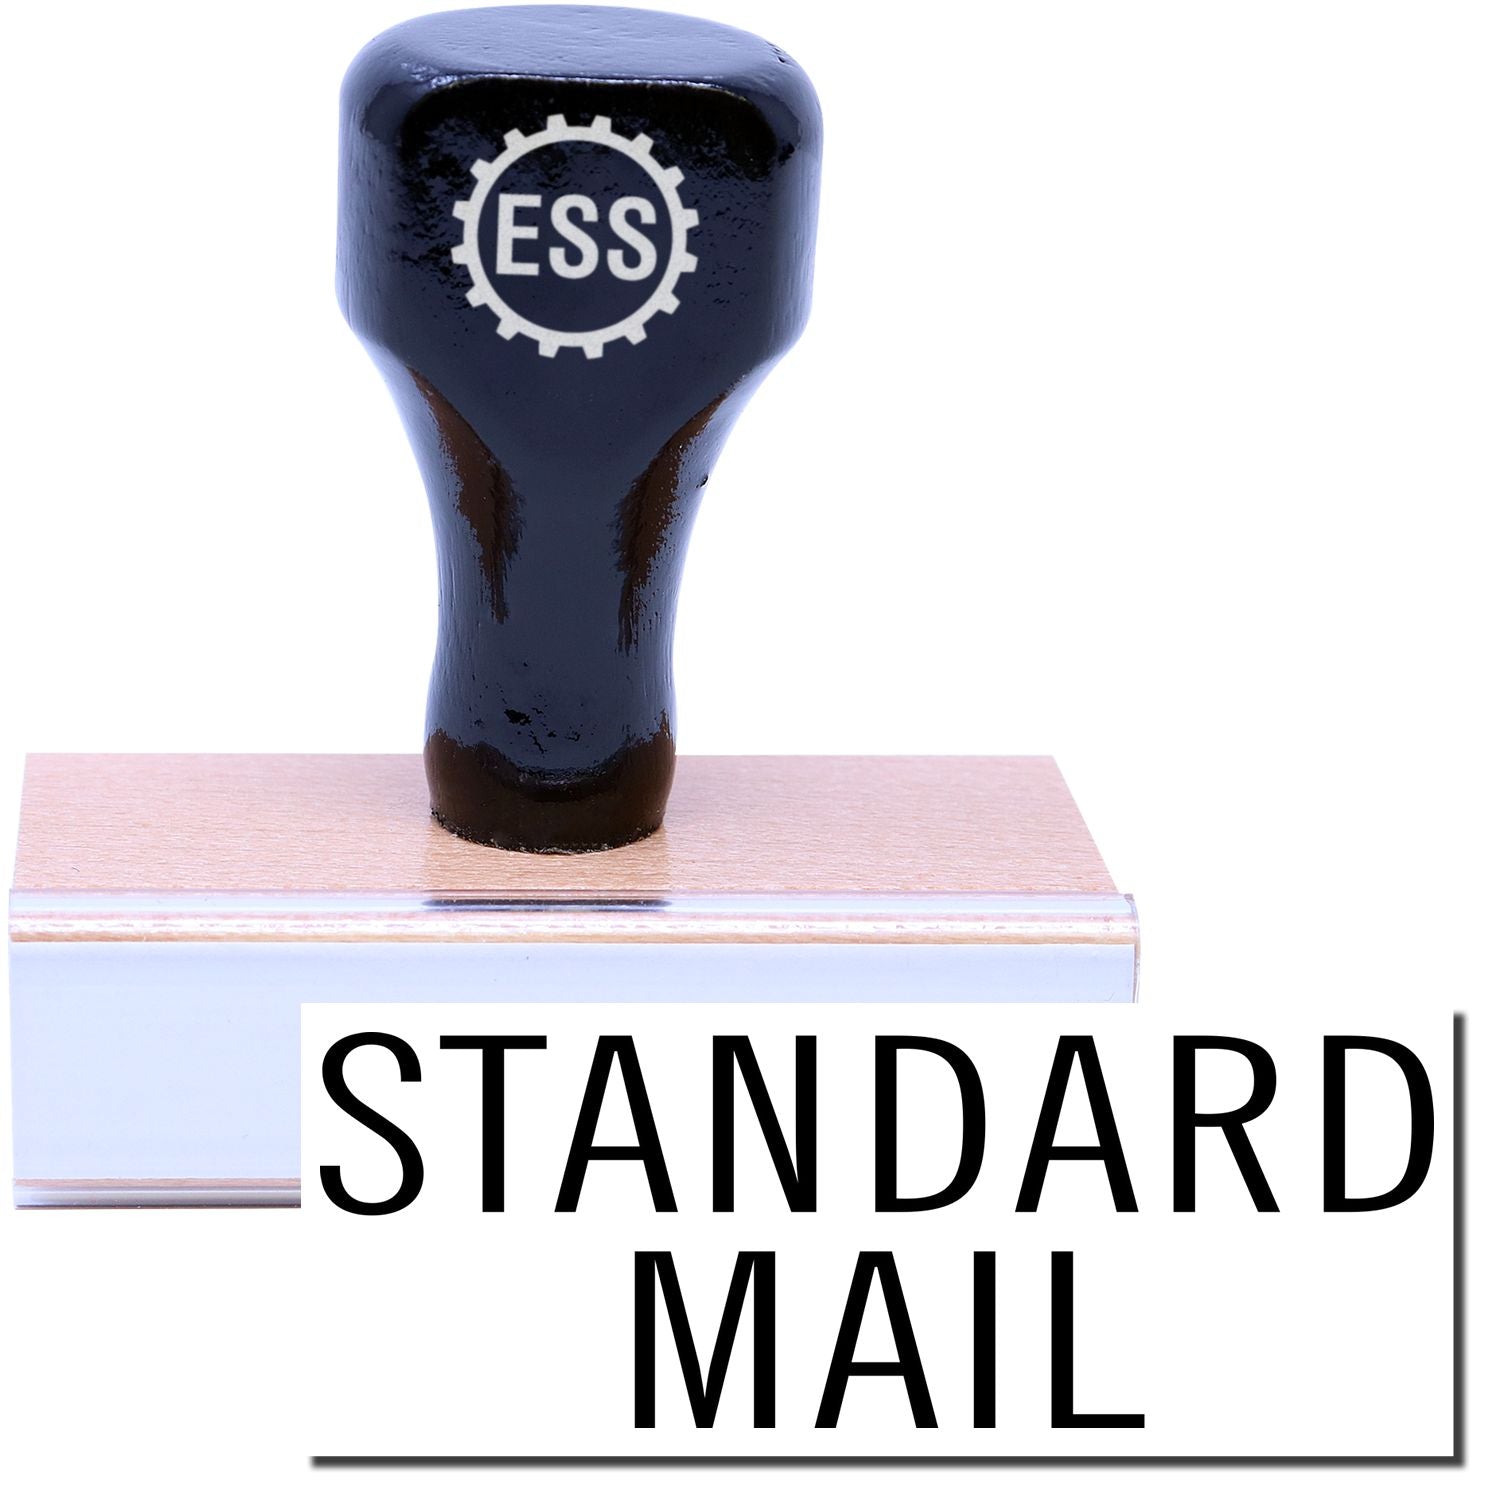 A stock office rubber stamp with a stamped image showing how the text "STANDARD MAIL" in a large font and in a stacked style is displayed after stamping.